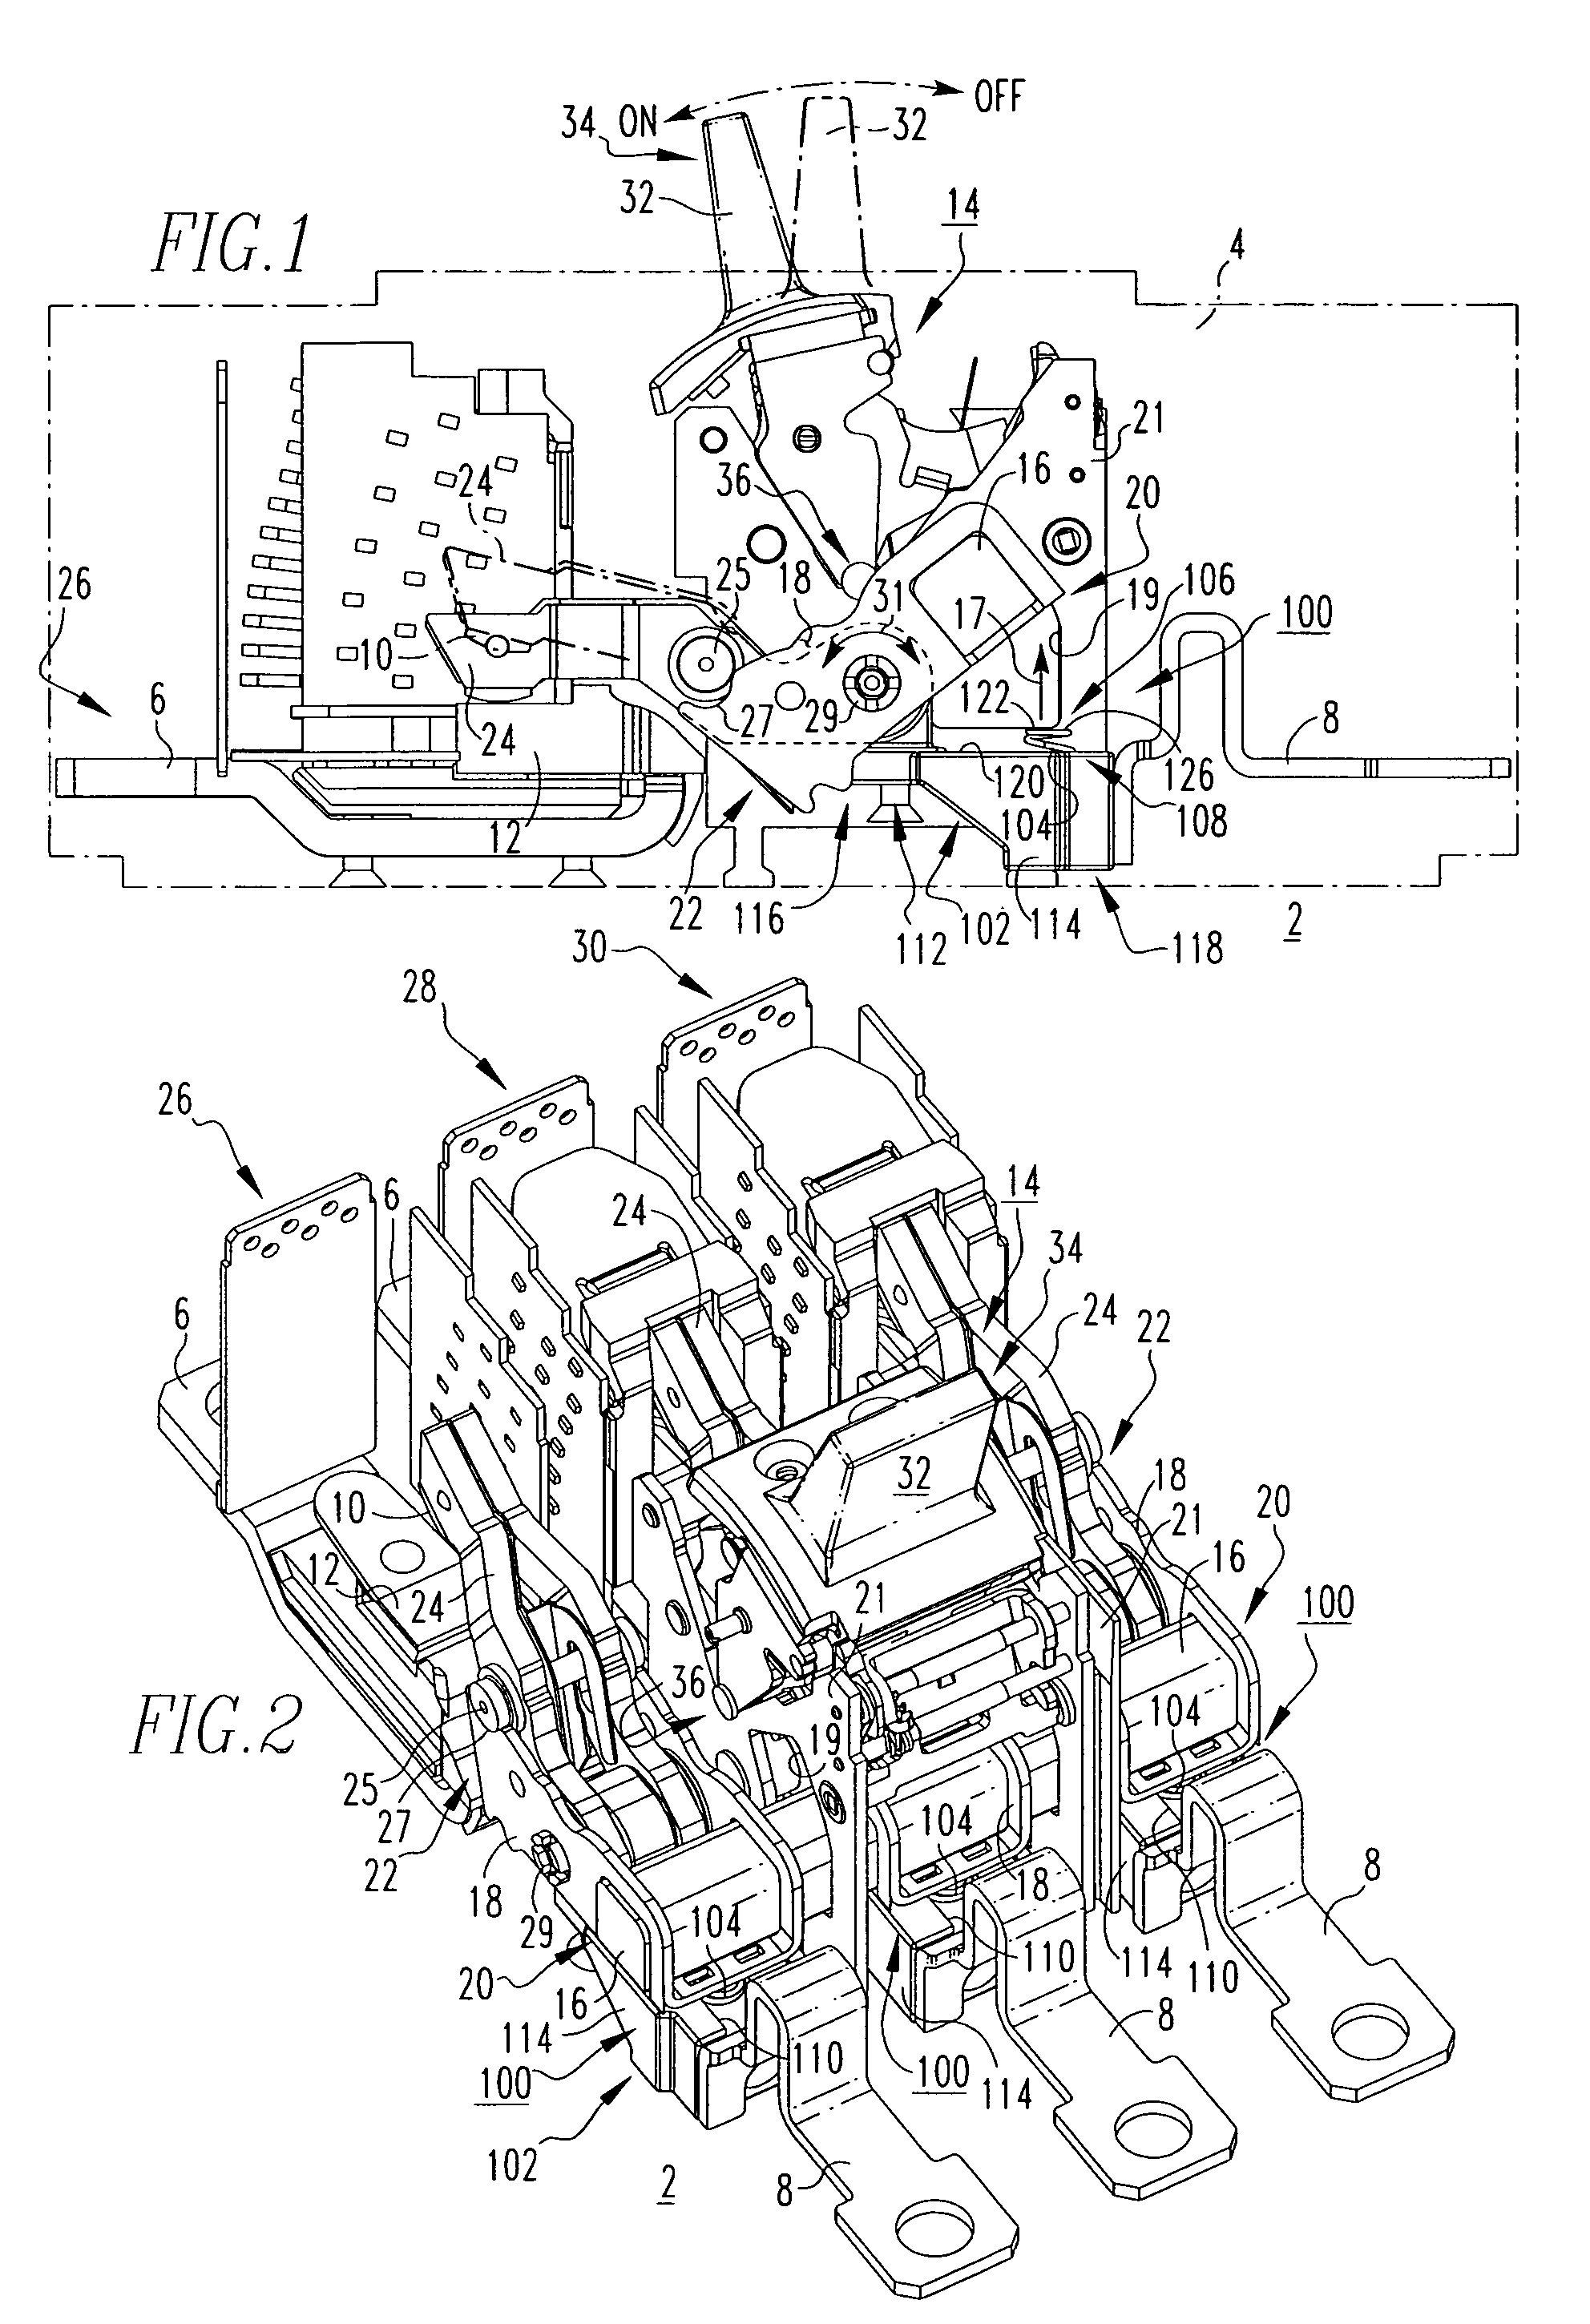 Crossbar assist mechanism and electrical switching apparatus employing the same